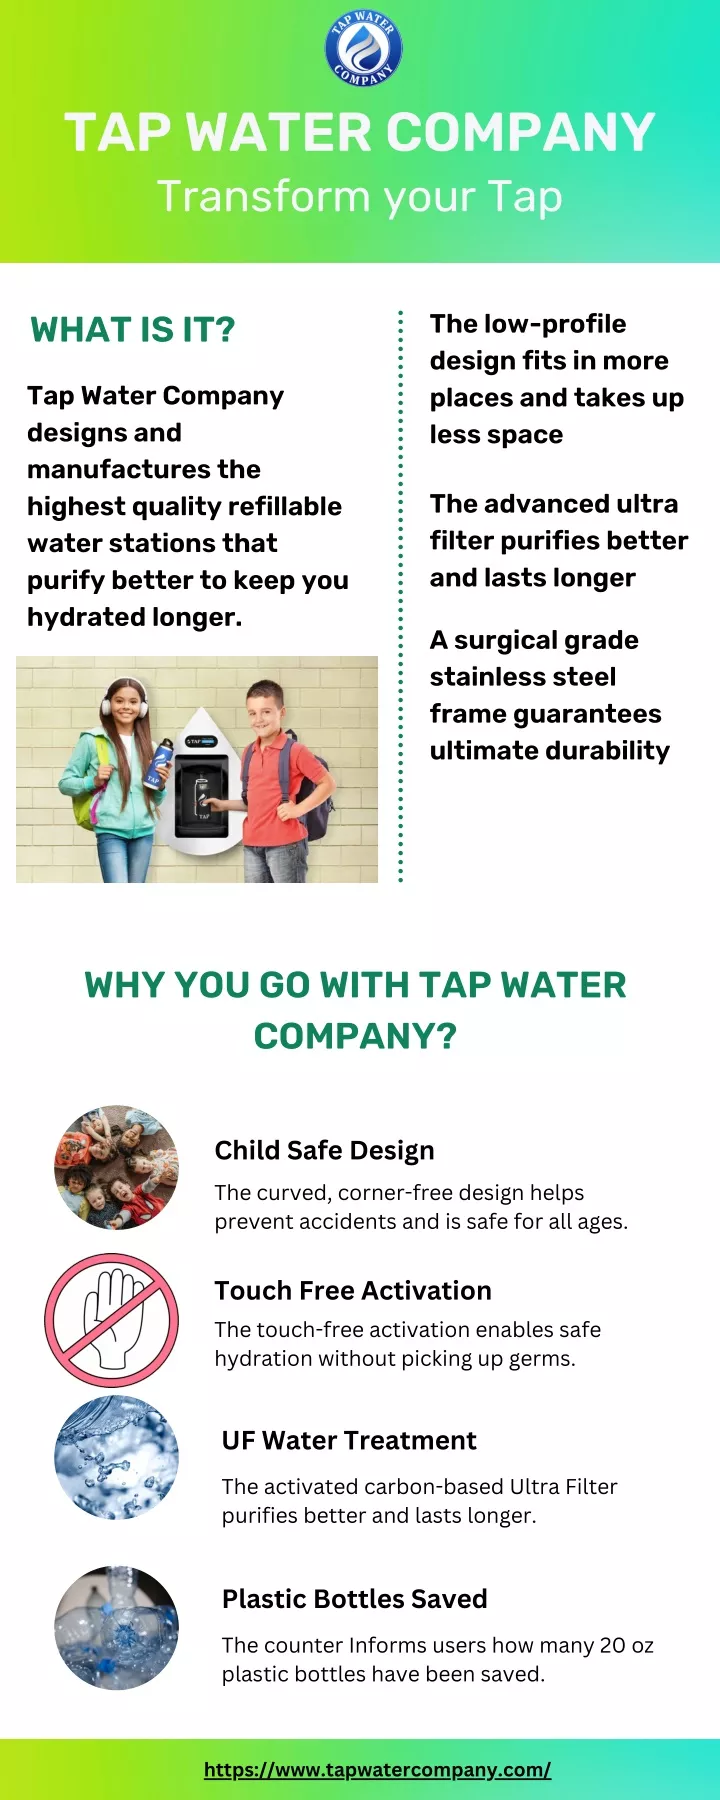 tap water company transform your tap